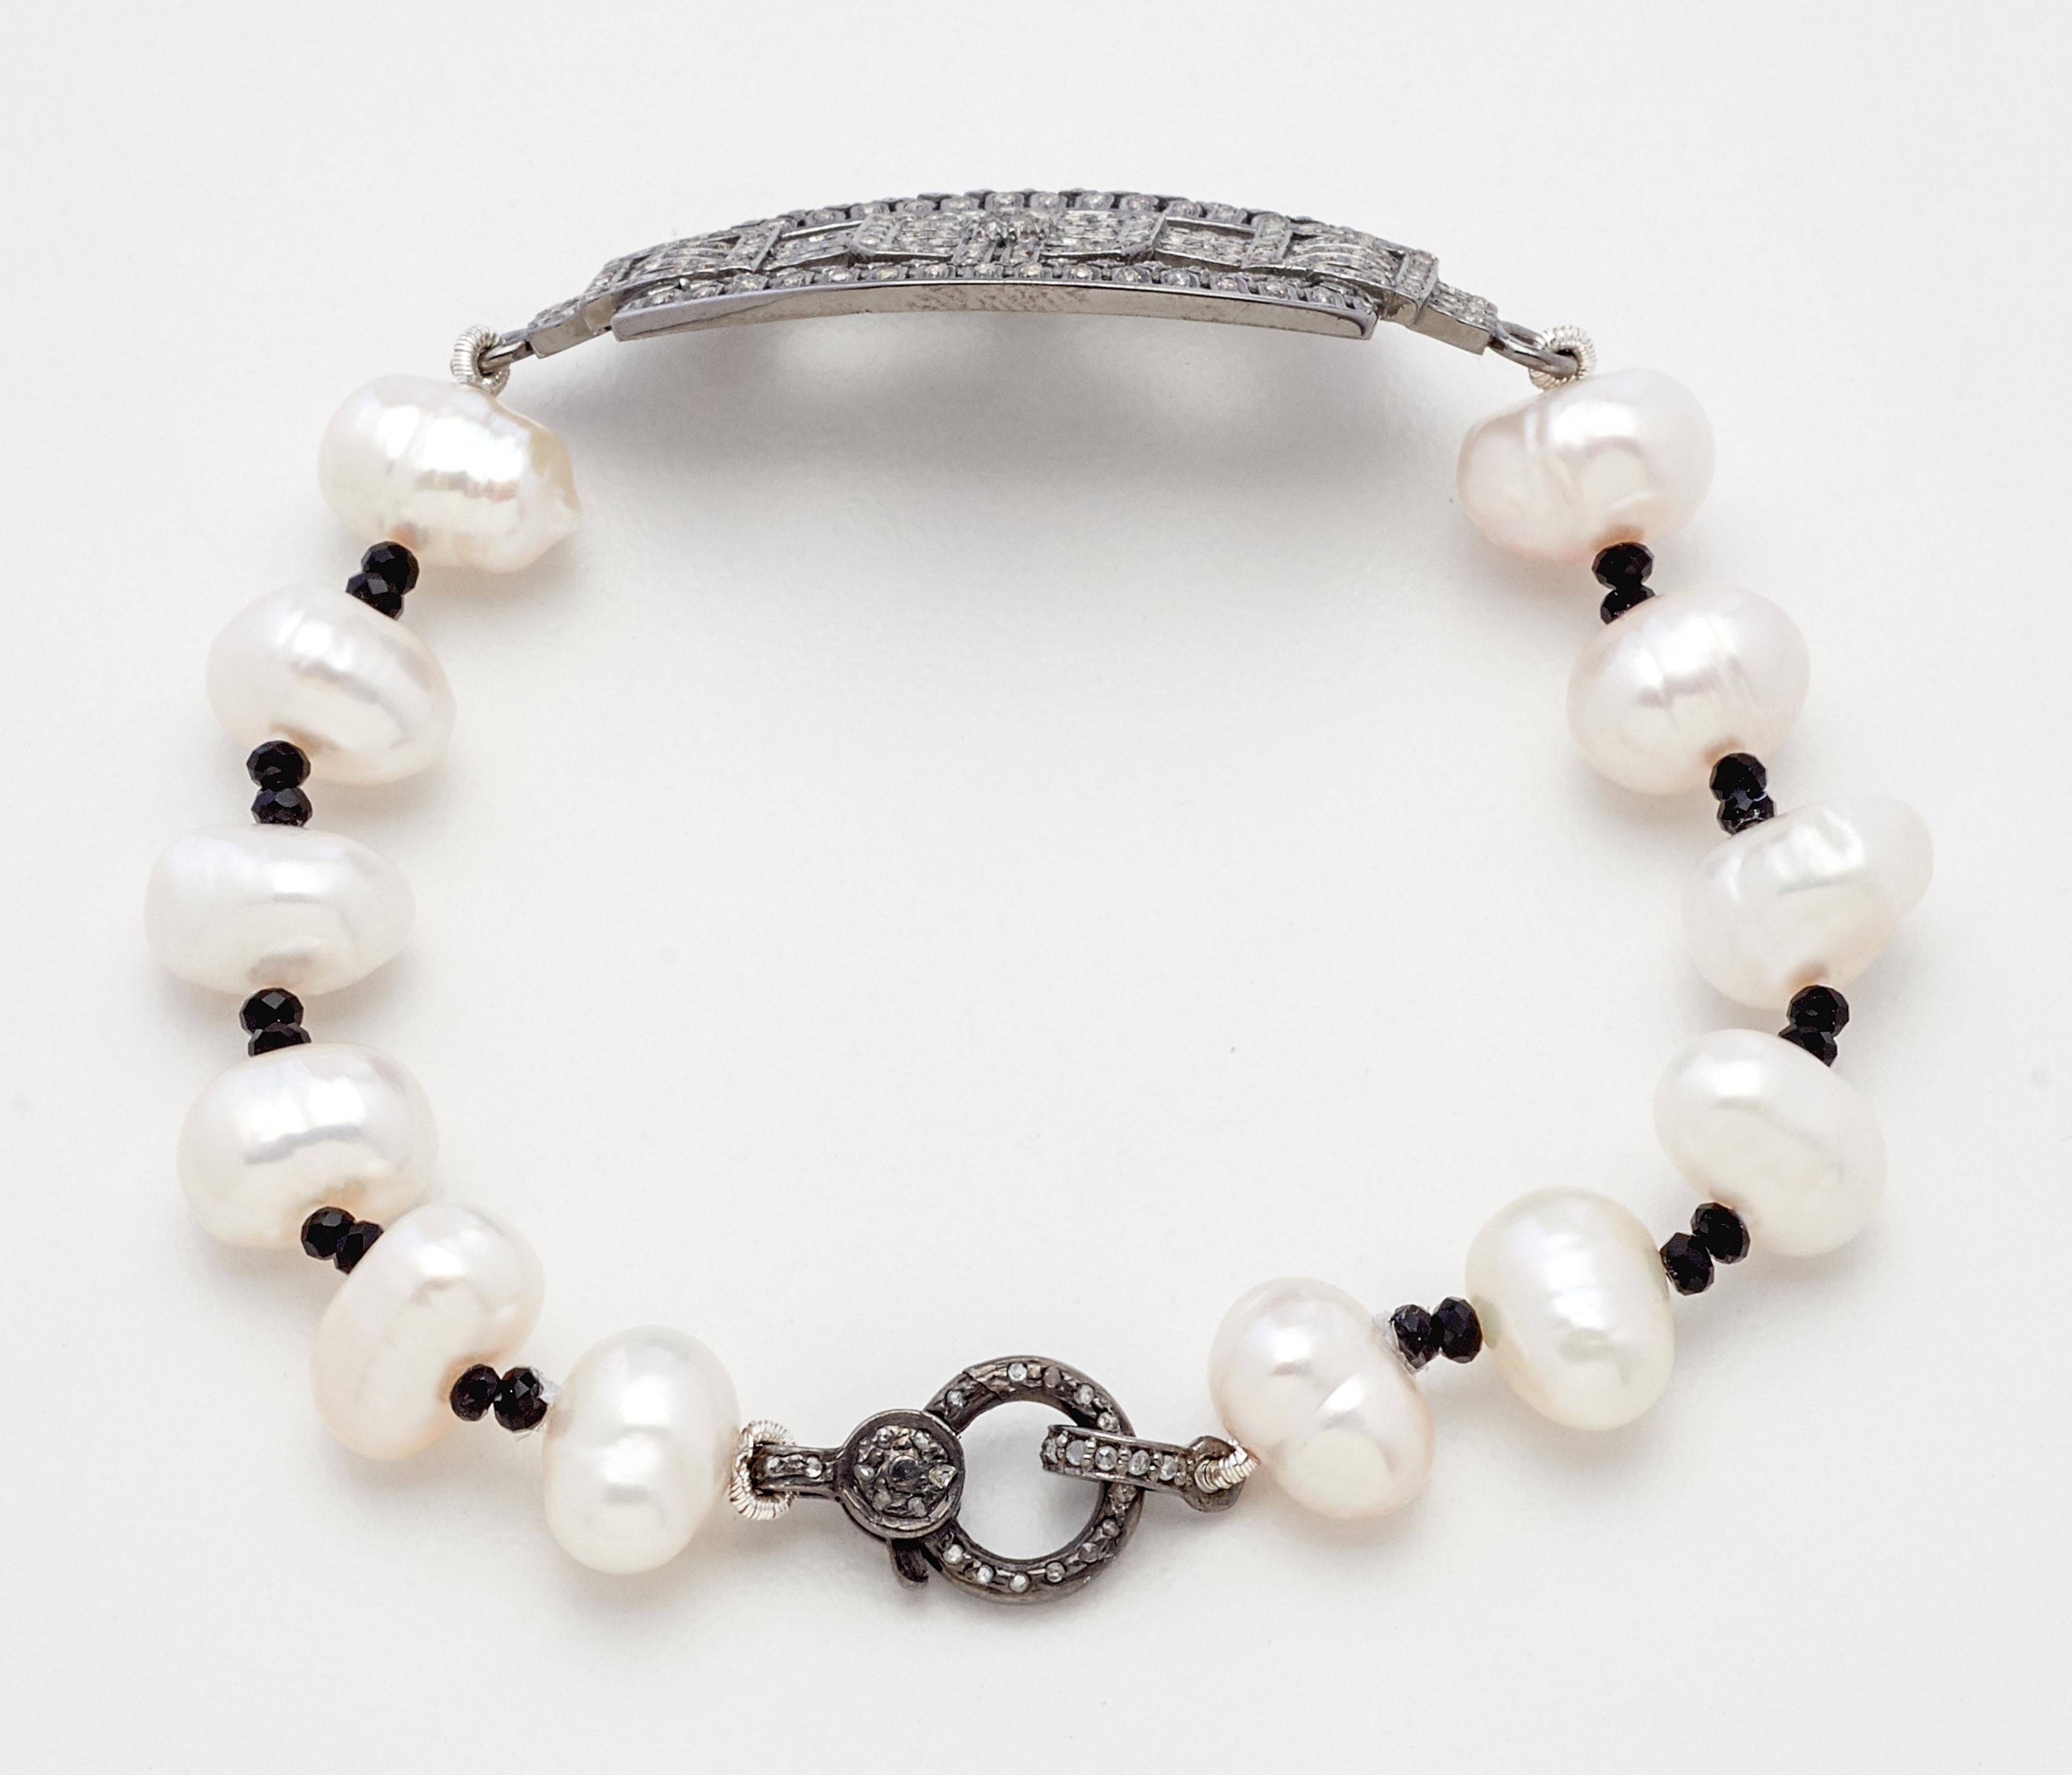 Artisan created, this beautiful art deco inspired diamond covered sterling silver placket bracelet with natural Akoya pearls and black spinel crystal beads beautifully adorns the wrist and is a versatile design that transcends most personal tastes.